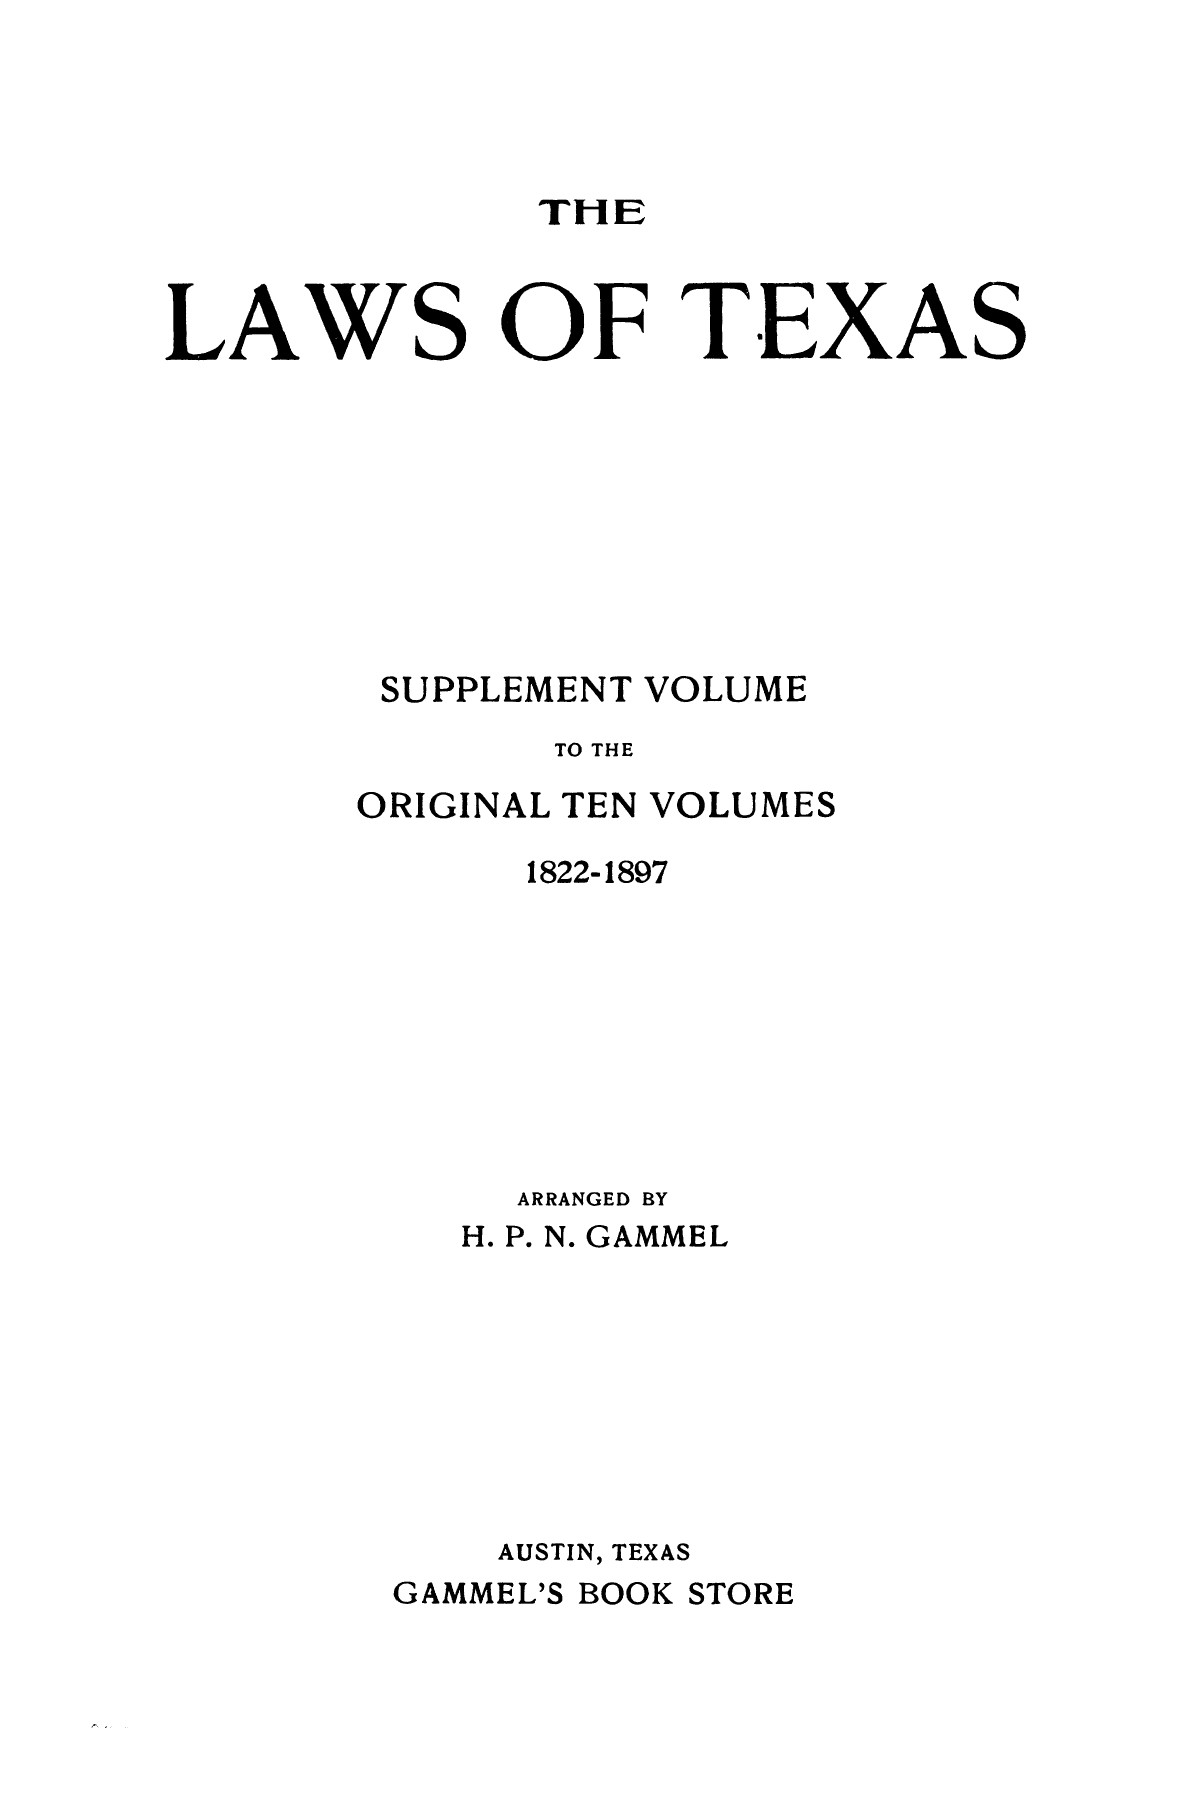 The Laws of Texas, 1917-1918 [Volume 18]
                                                
                                                    [Sequence #]: 1 of 1589
                                                